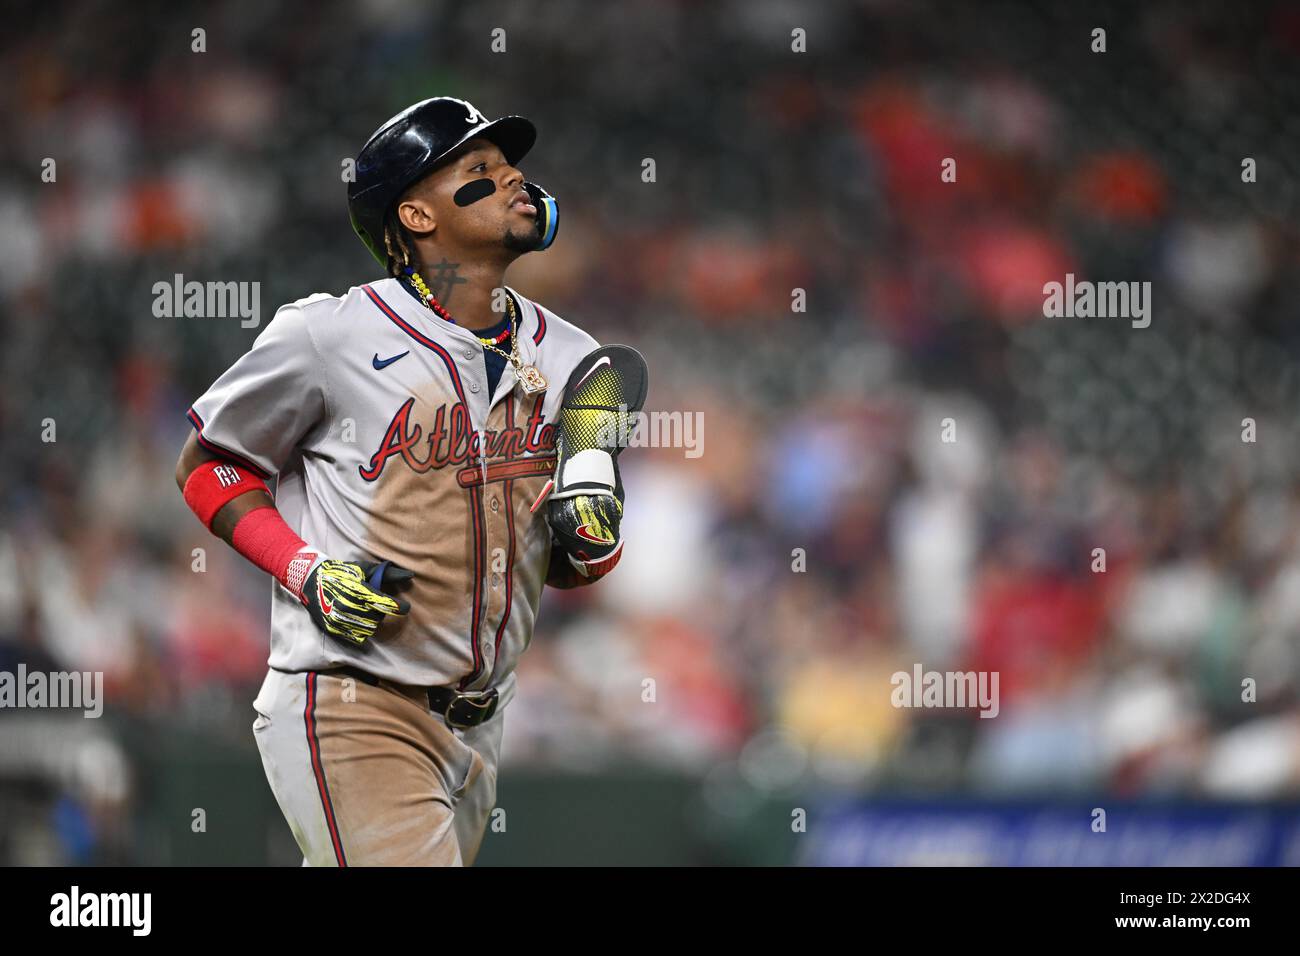 Atlanta Braves outfielder RONALD ACU„A JR. (13) goes to first base after being hit by a pitch in the top of the ninth inning during the MLB baseball g Stock Photo